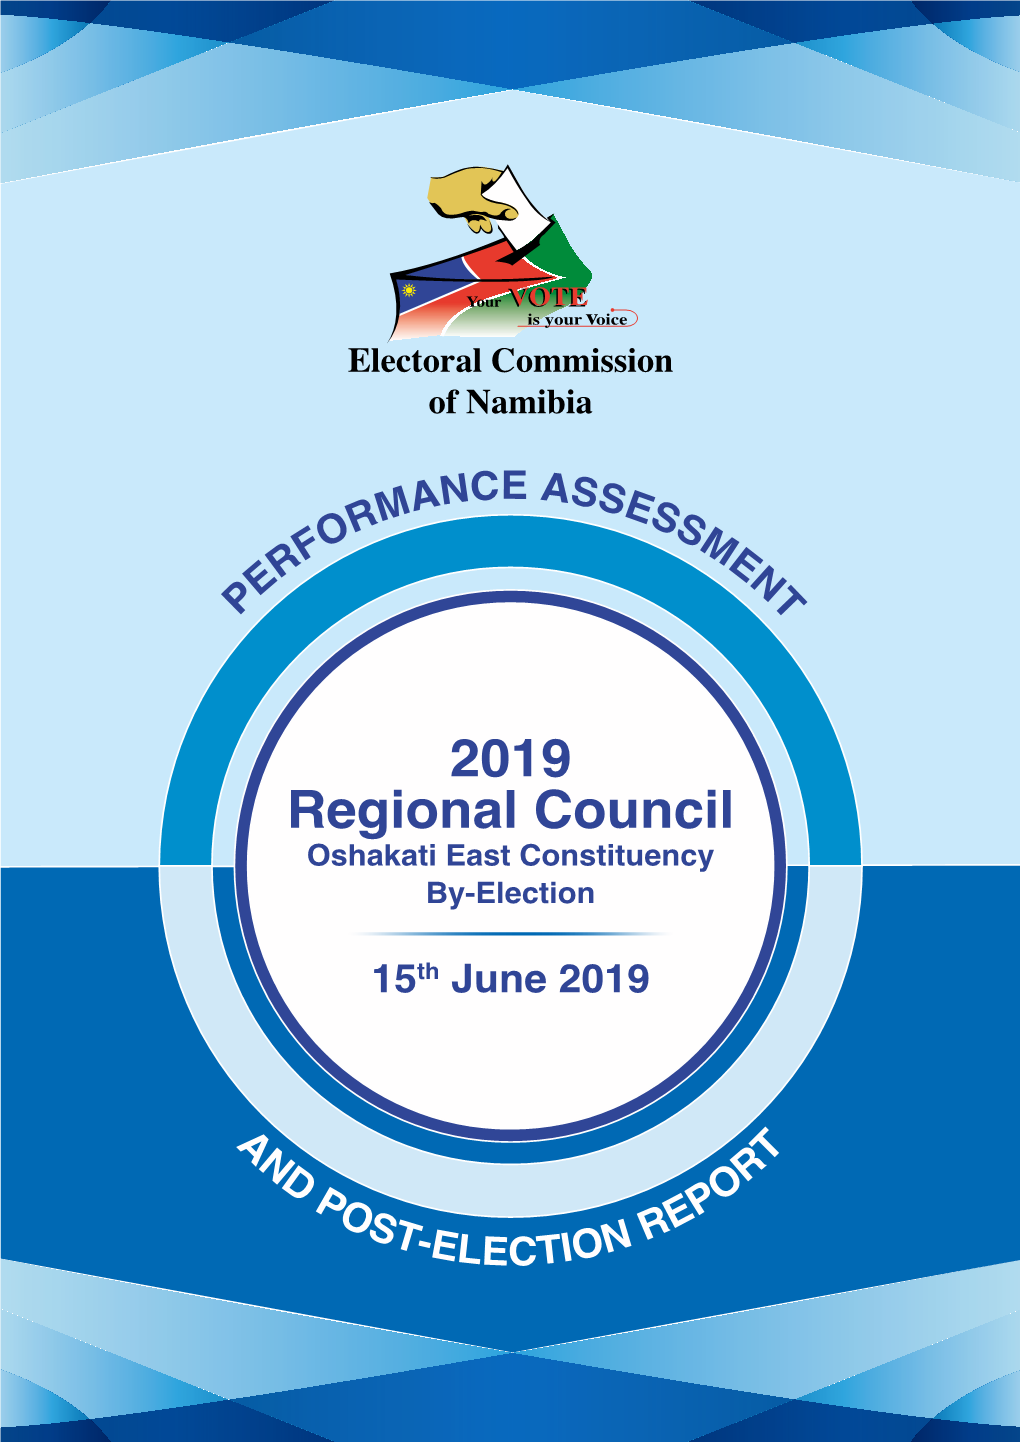 2019 Regional Council Oshakati East Constituency By-Election